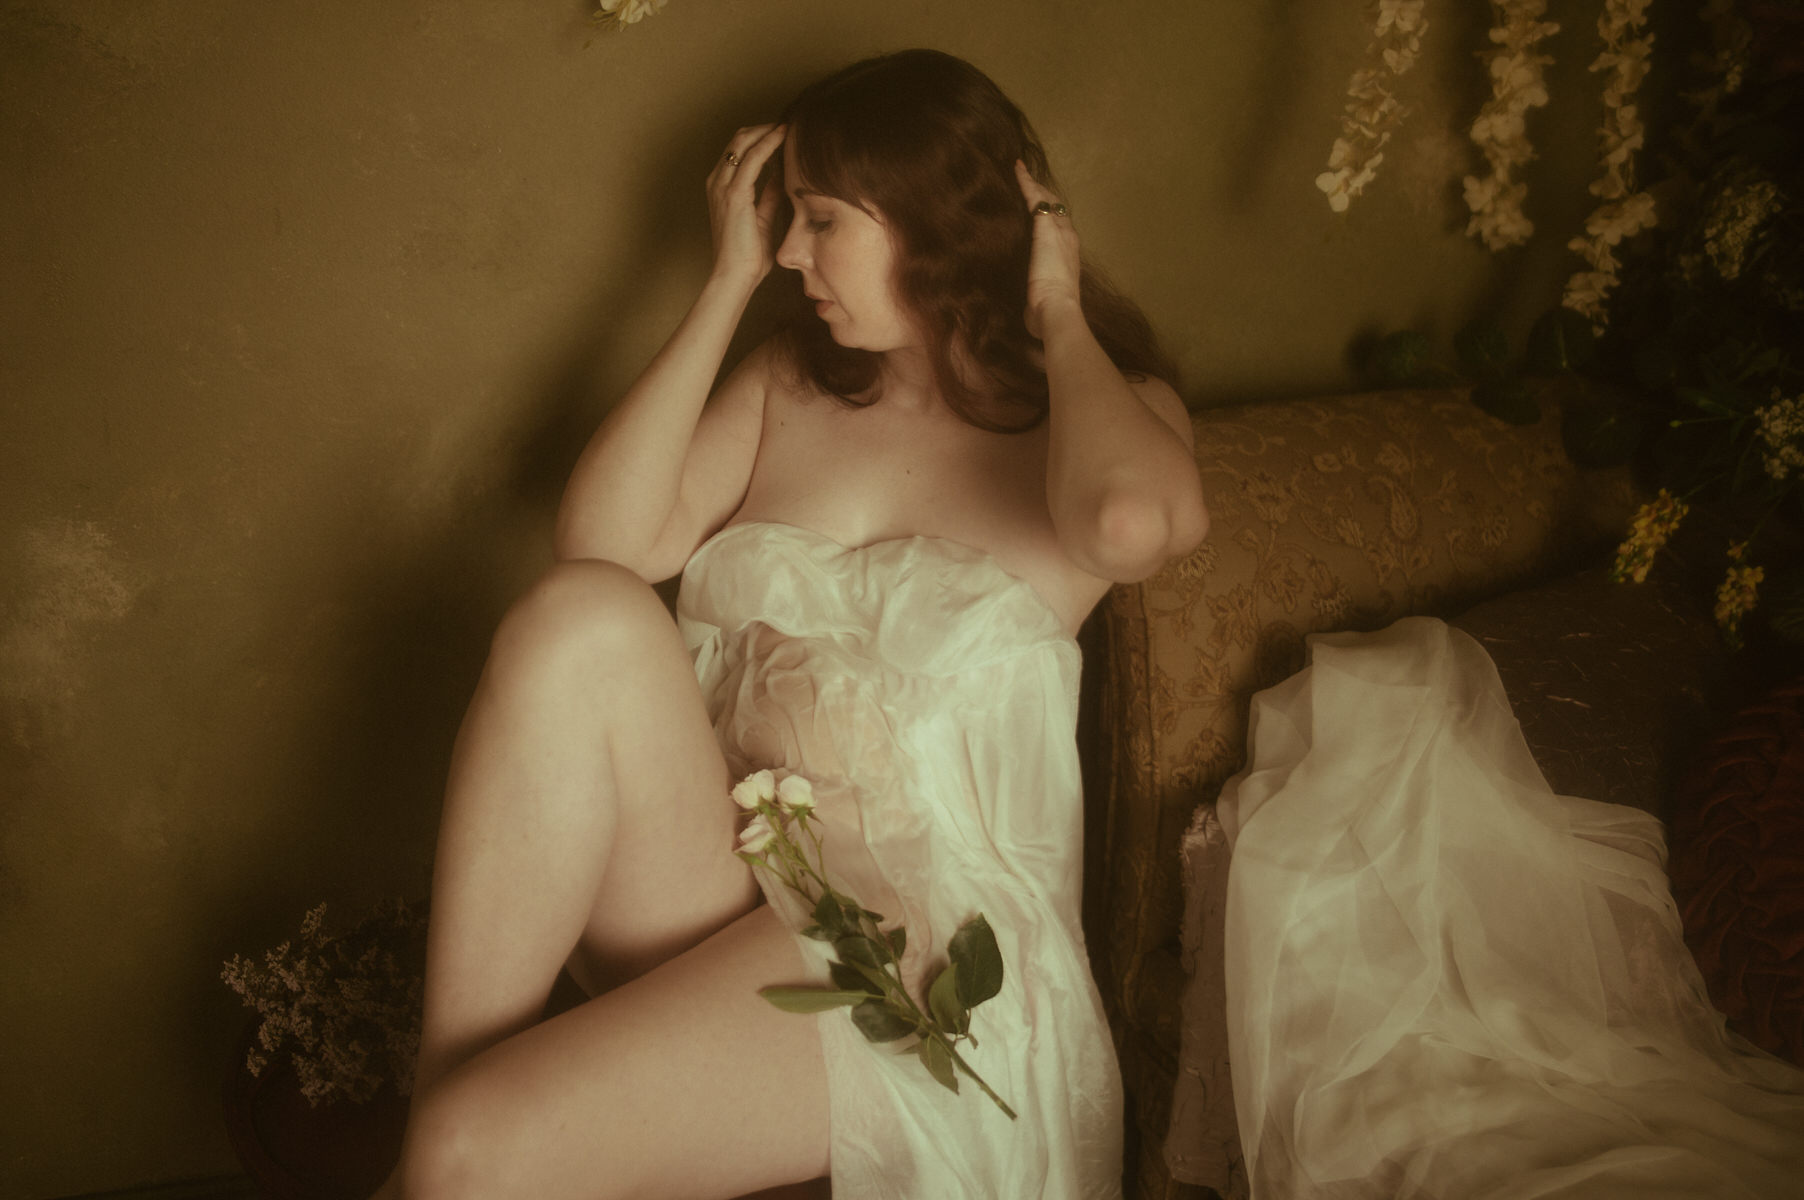 A woman posing in wet fabric adorned with flowers sitting on a bed, captured by a Texas boudoir photographer.